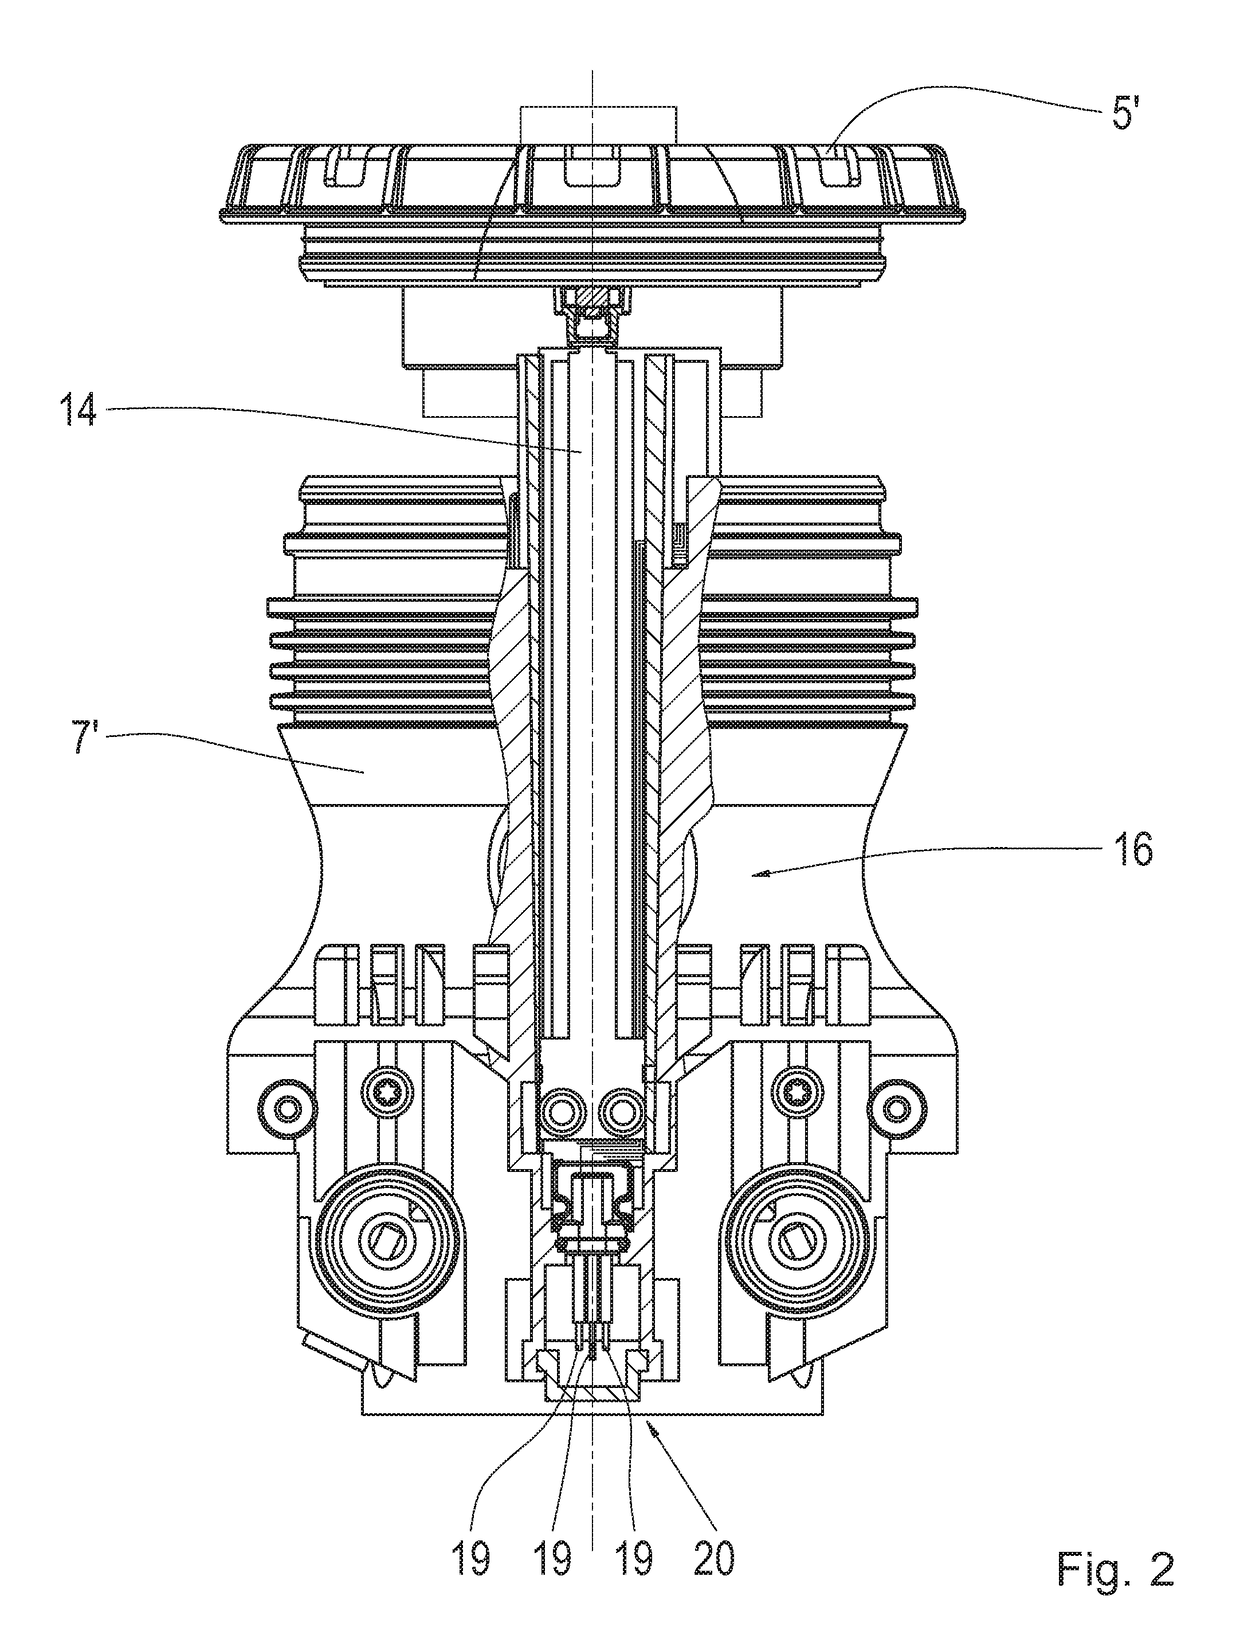 Air Spring For A Motor Vehicle